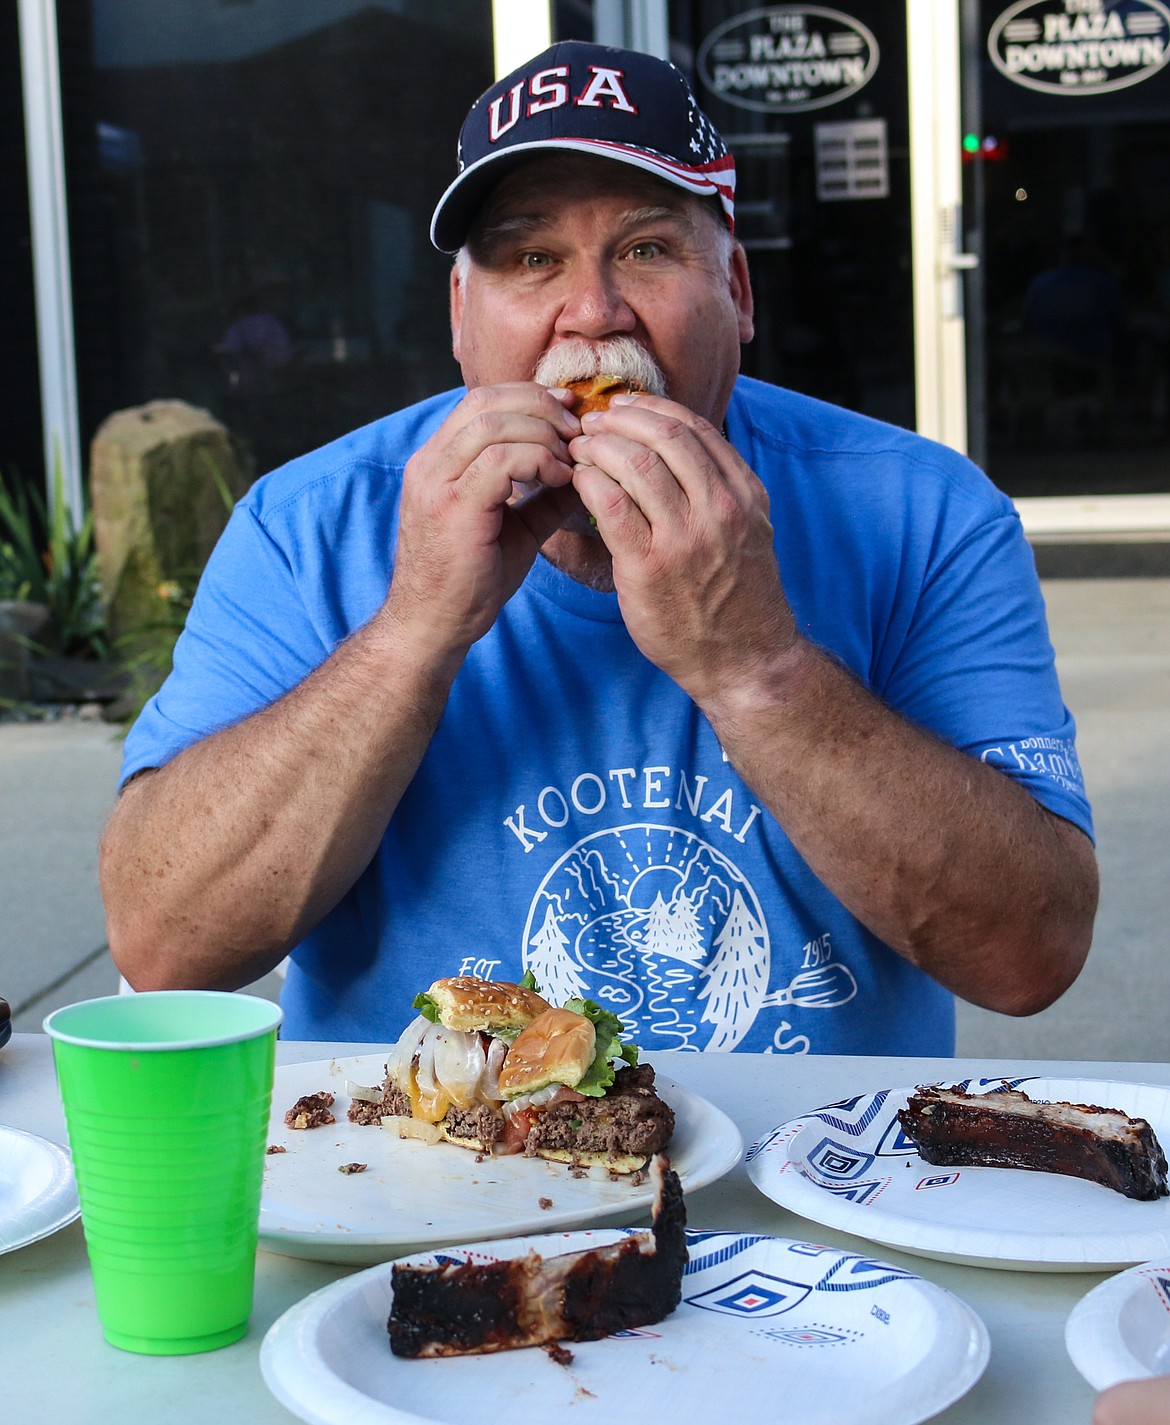 The Wild Game and Pork Rib Cook Off judge, Dave Koon, enjoyed his job tasting the competitors&#146; entries.